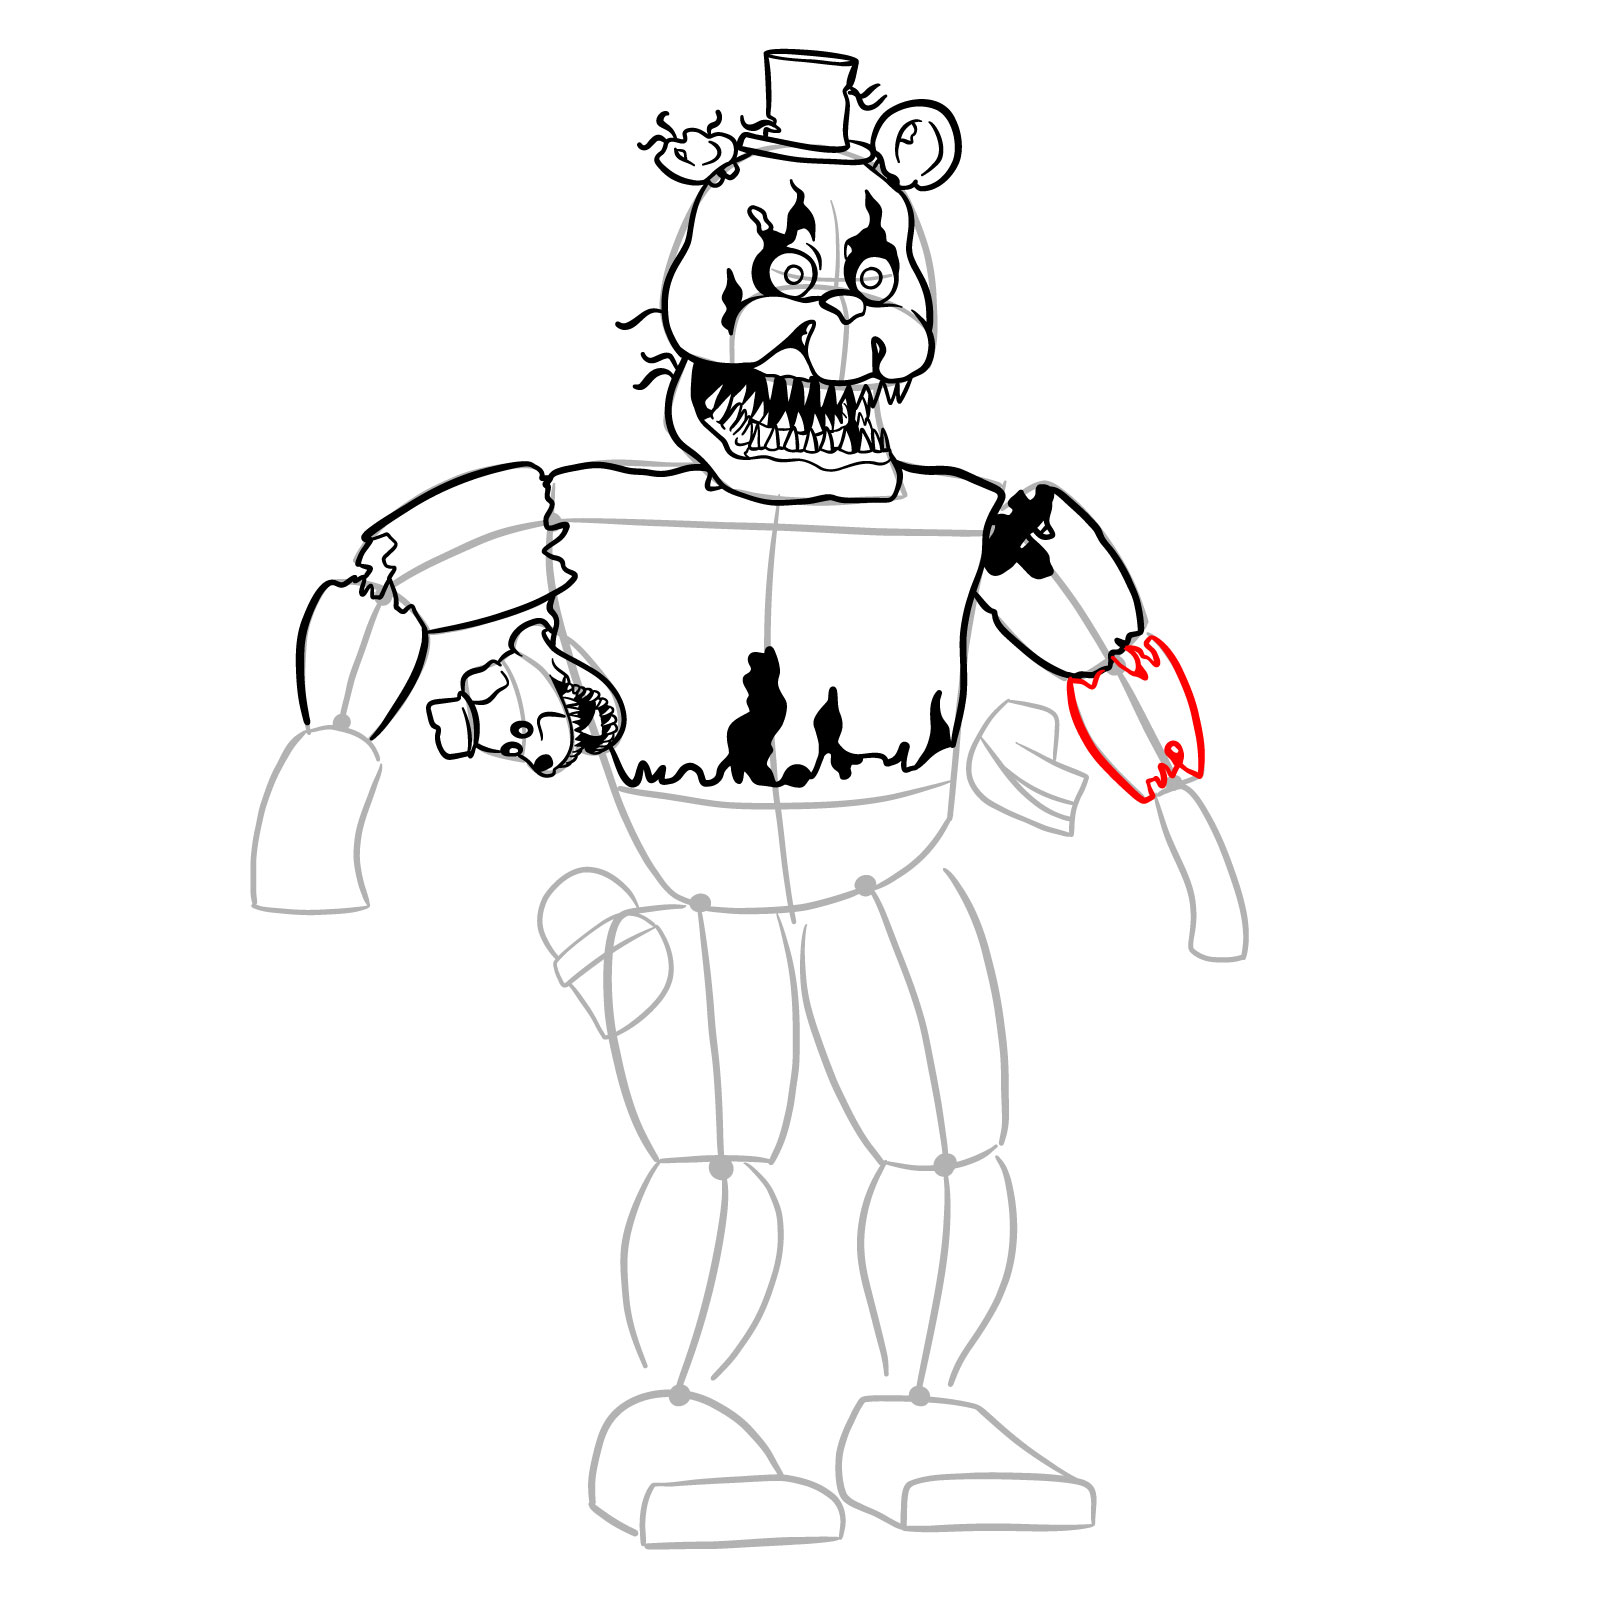 How to draw Nightmare Freddy - step 25